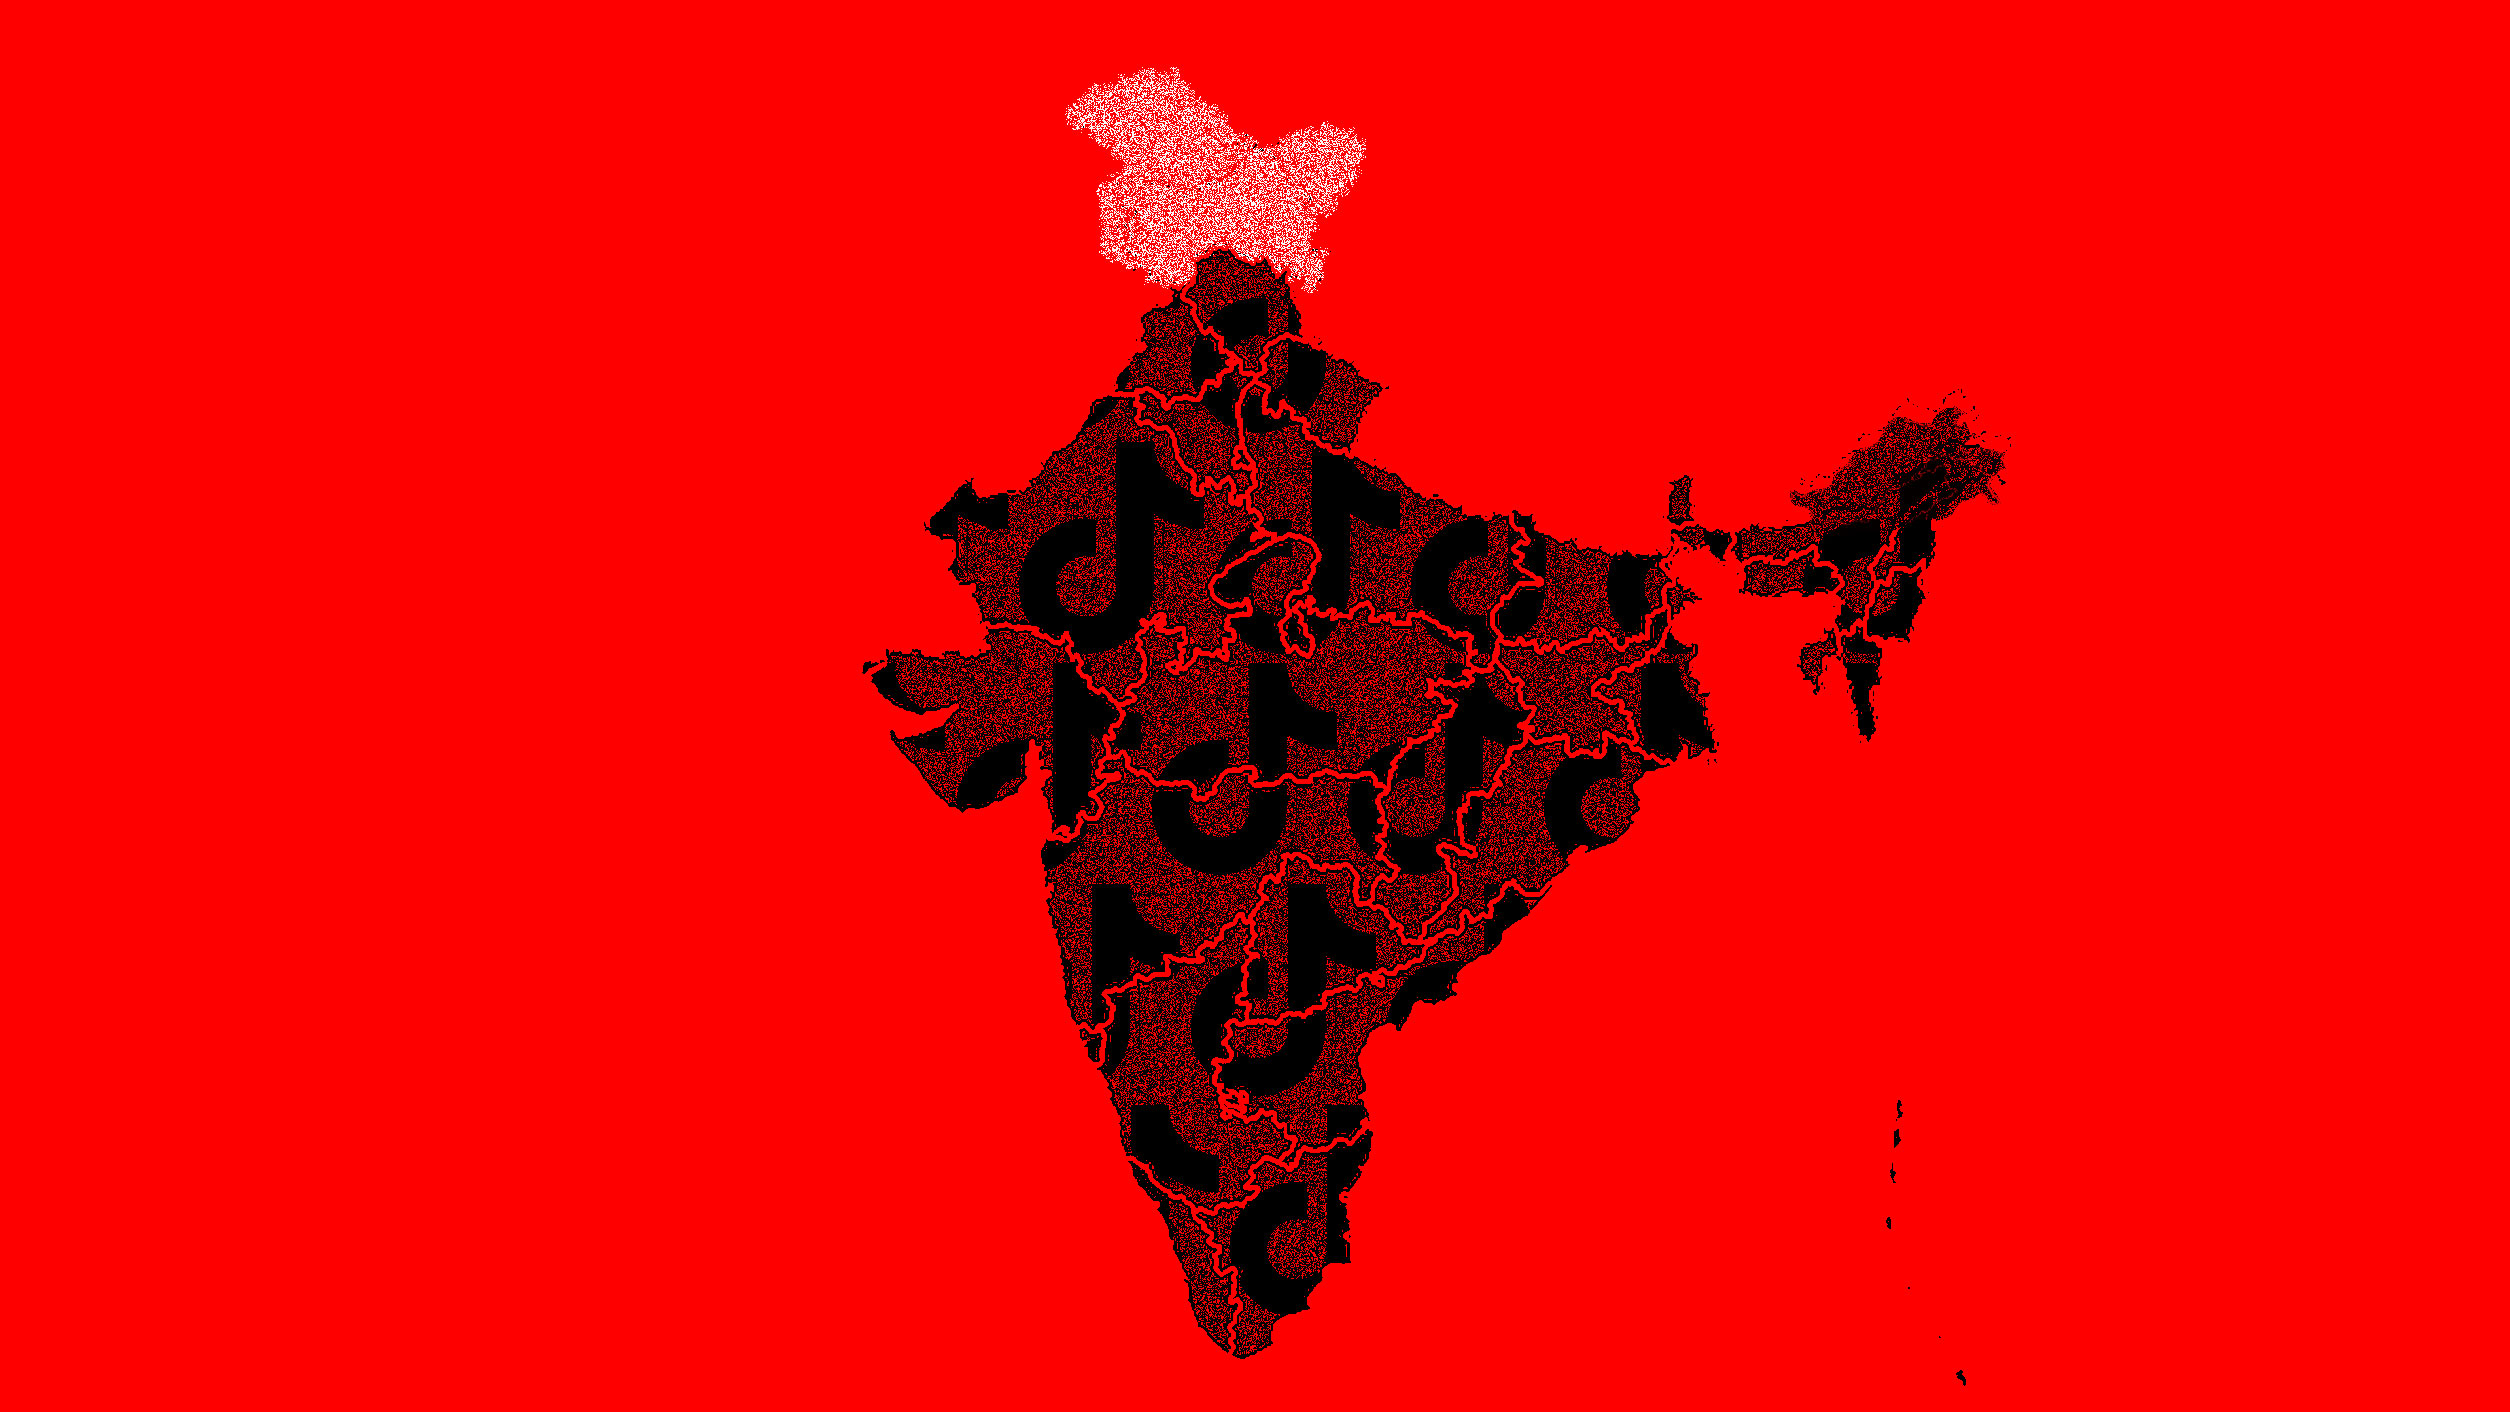 The map of India; with Kashmir highlighted